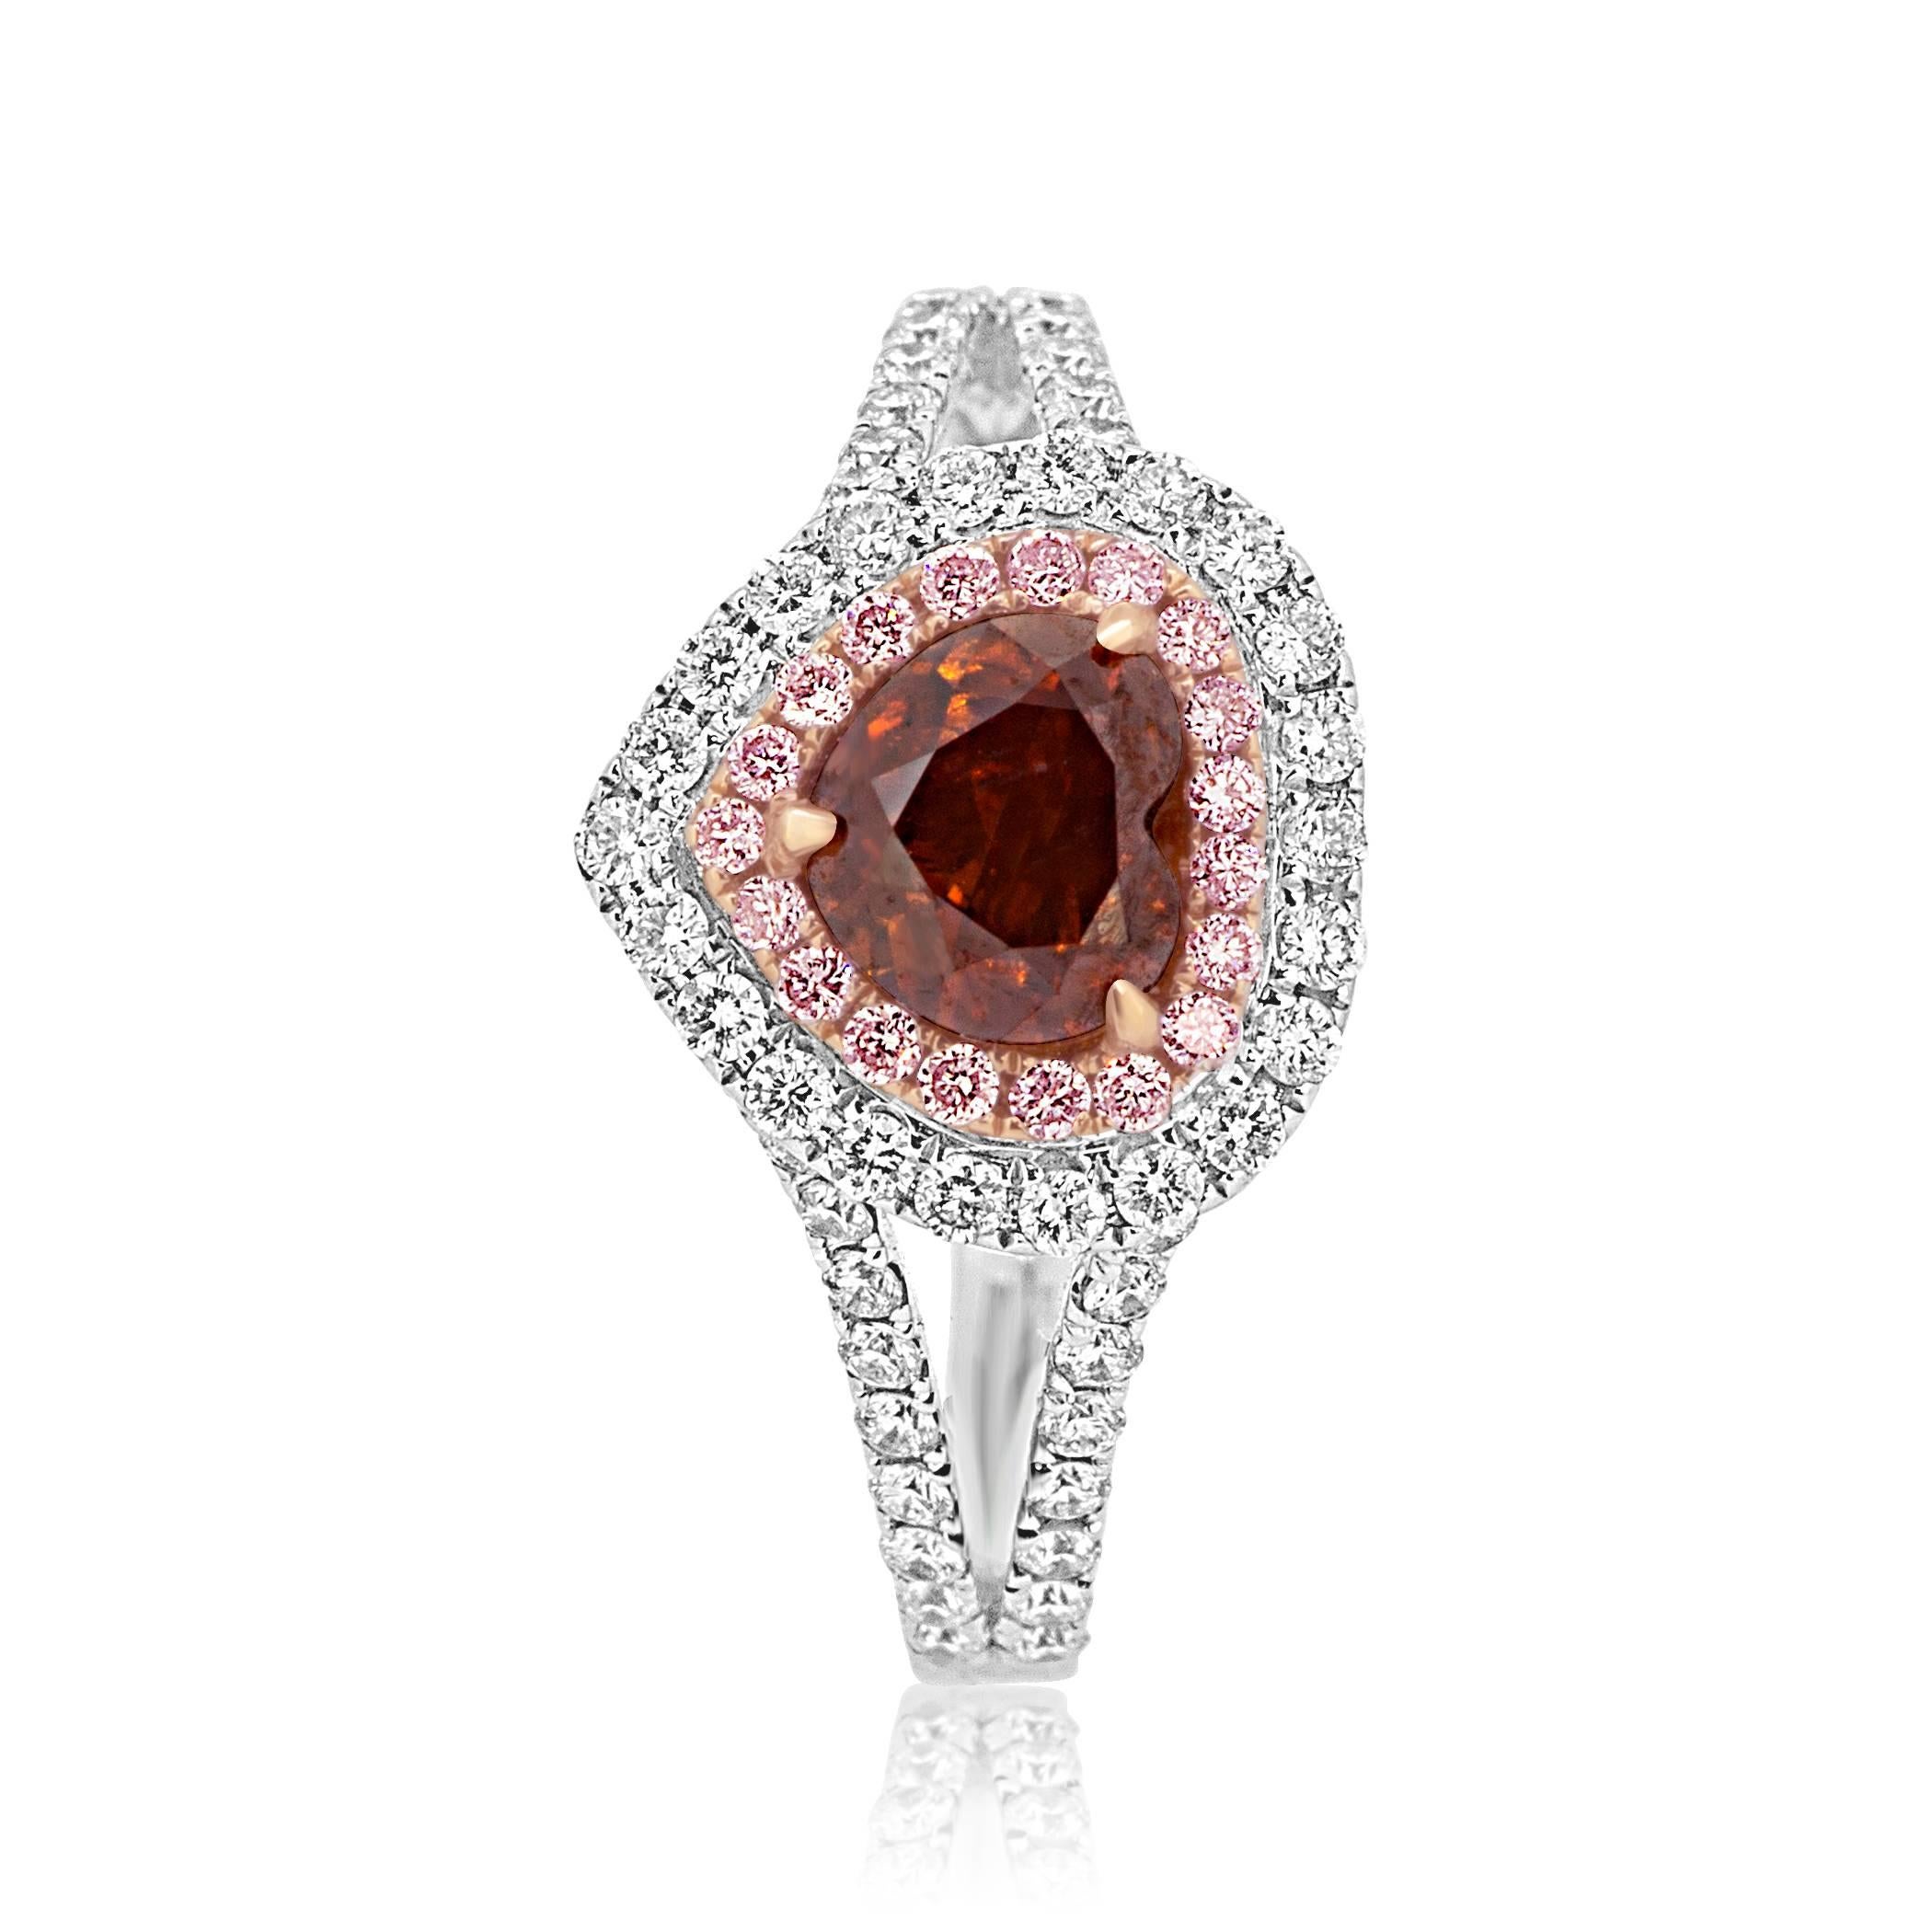 A very rare EGL USA Certified Fancy Dark Brown Orange Heart Shape Diamond 1.02 Carat encircled in a double halo of Natural Fancy pink Diamond Rounds 0.22 Carat and White Diamond Rounds 0.54 Carat in 18K White and Rose Gold Split Shank Bridal Fashion